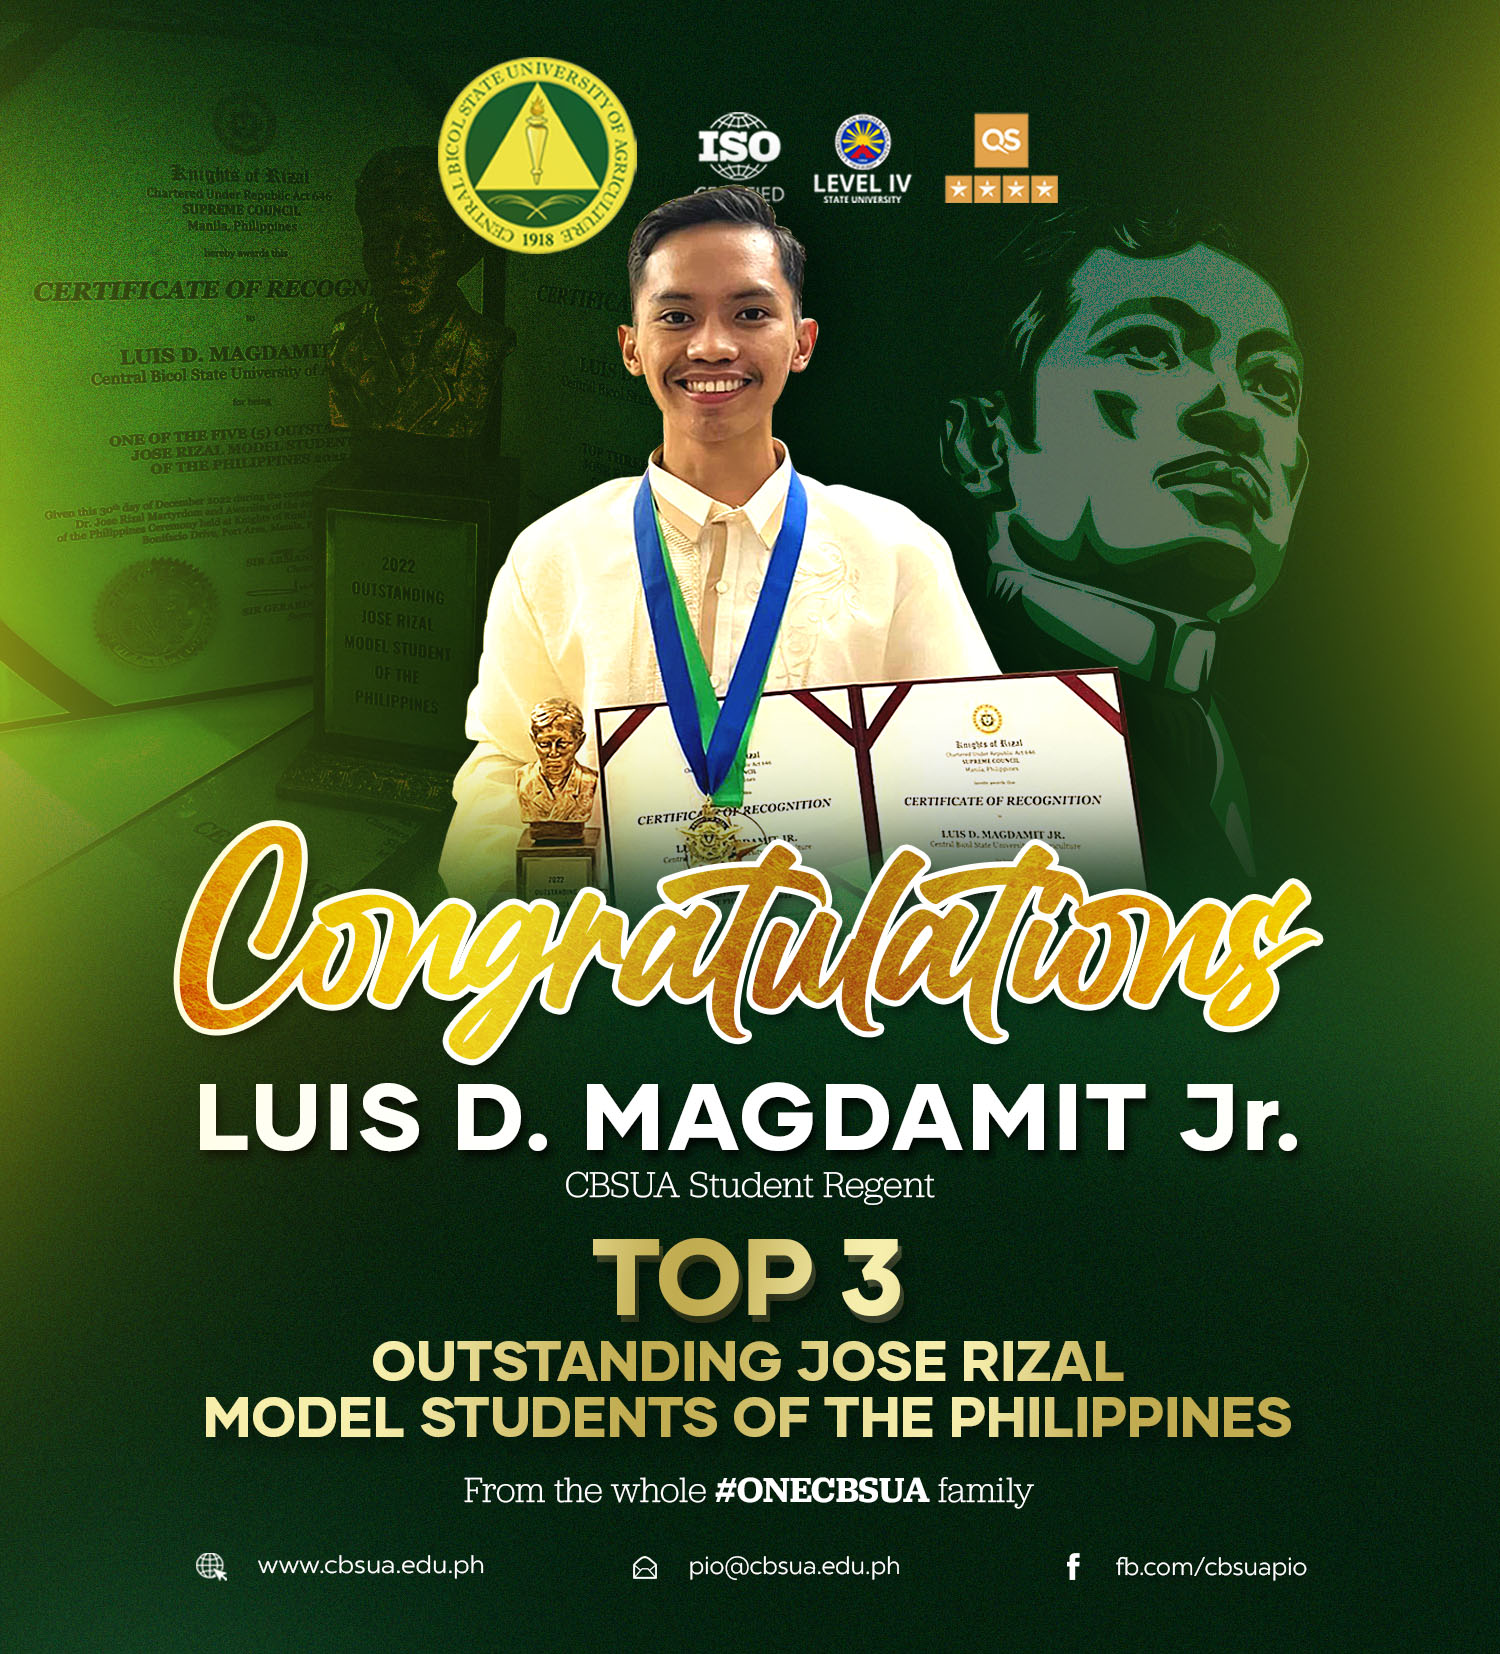 MAGDAMIT RANKS 3RD IN THE 33RD SEARCH FOR JOSE RIZAL MODEL STUDENT